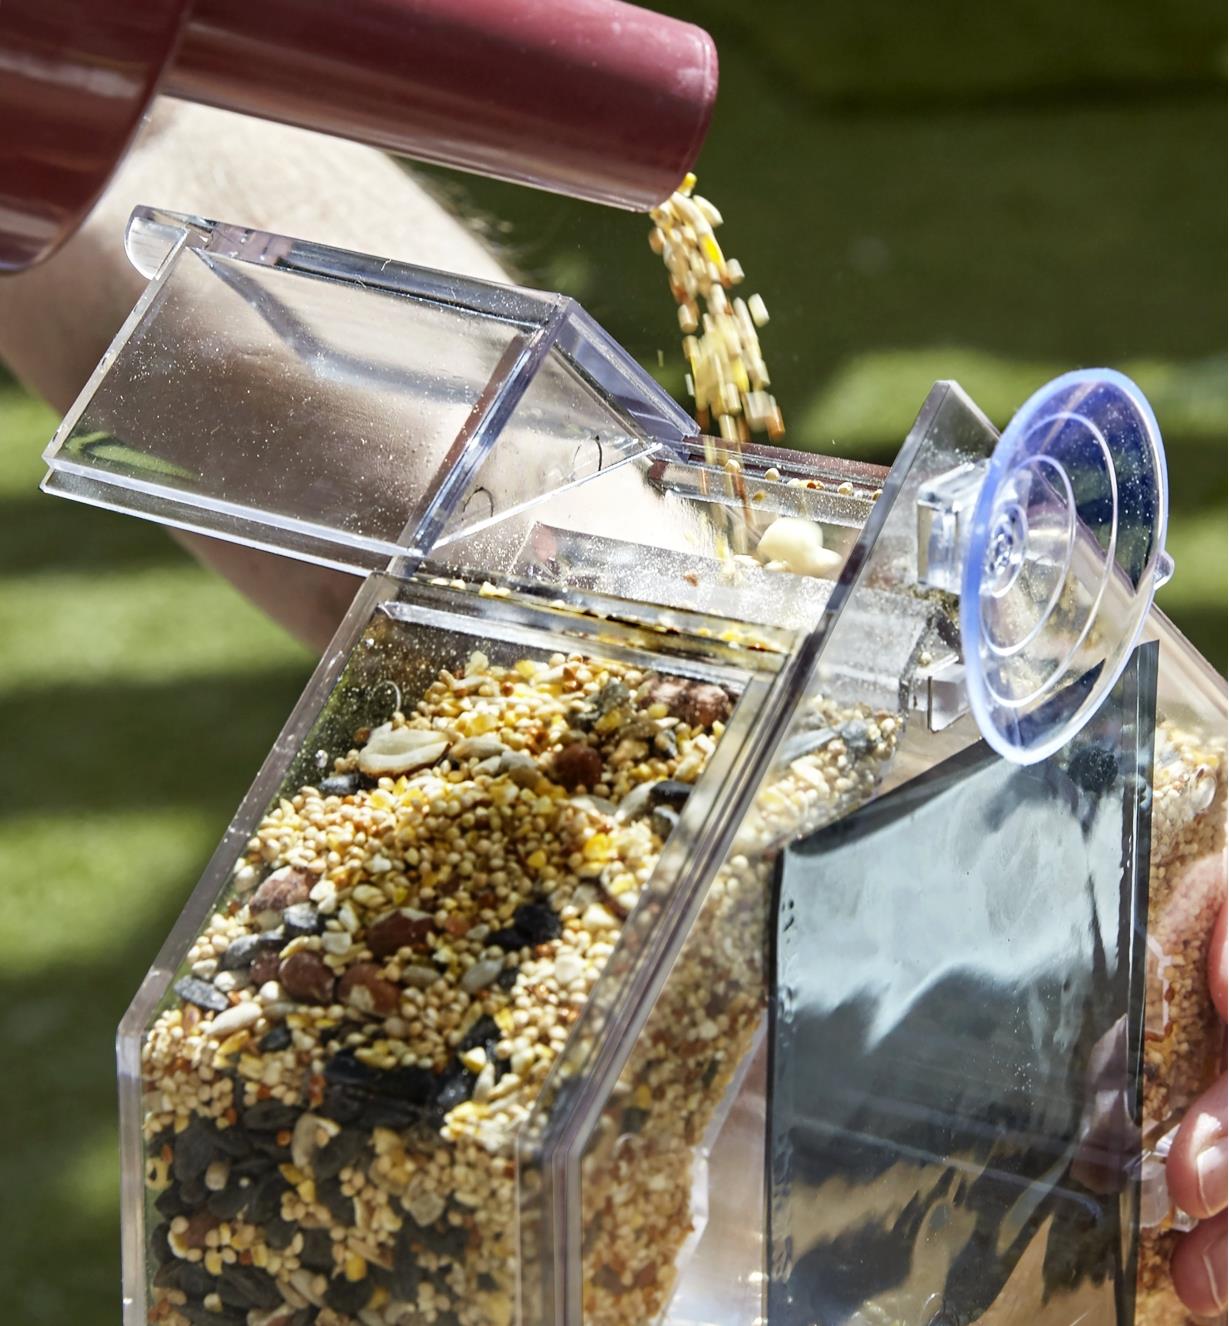 Refilling a window bird feeder by pouring seed mix into a port at the top of the feeder